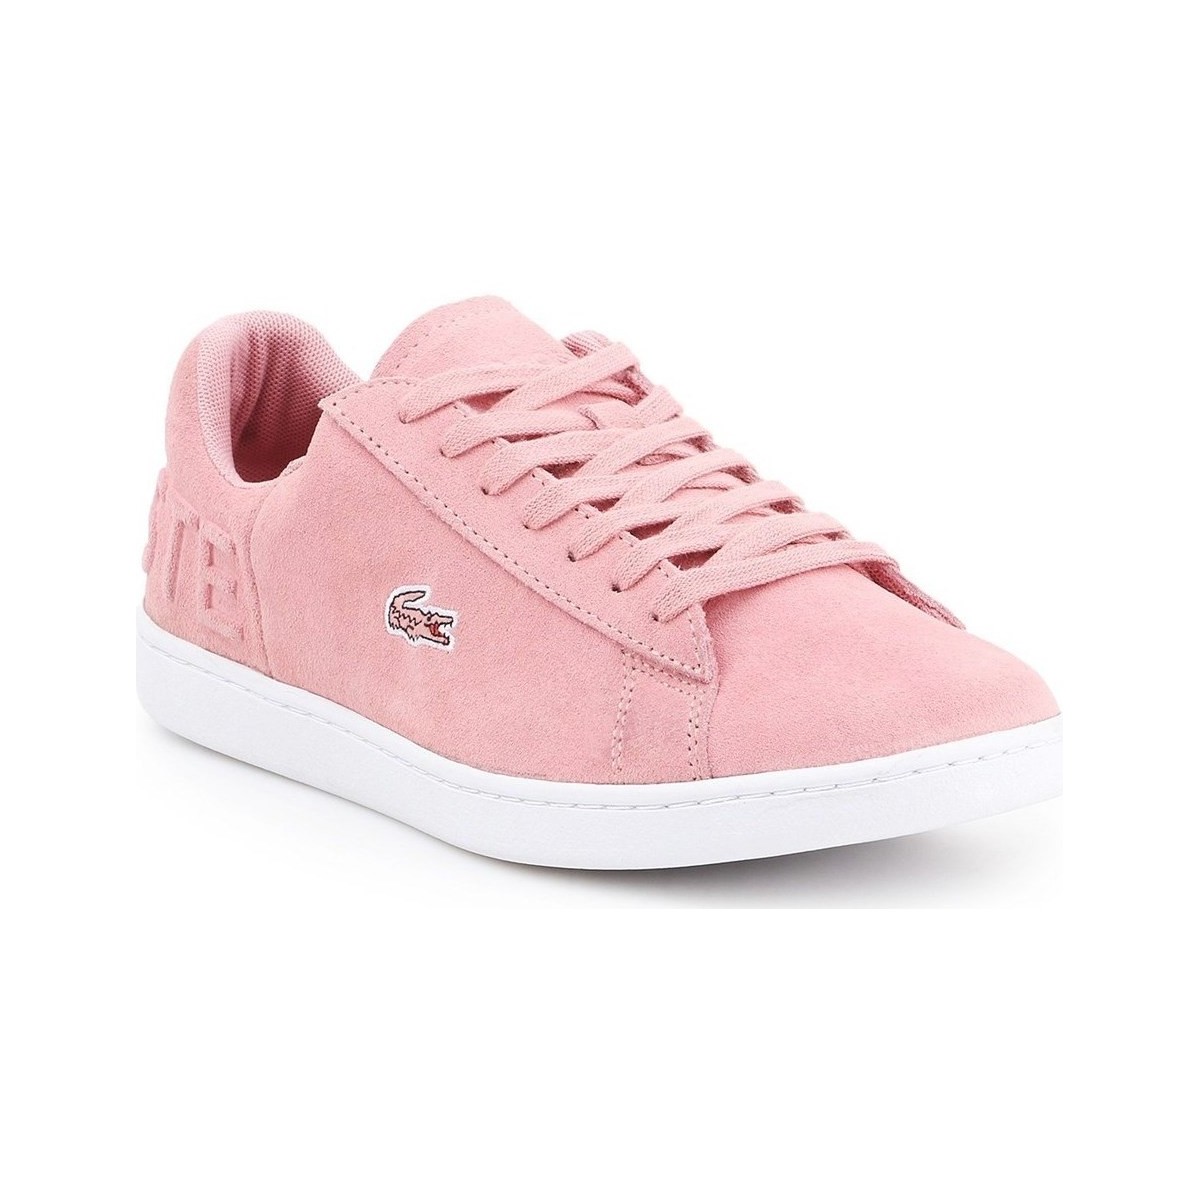 Chaussures Femme Baskets basses Lacoste Carnaby Evo Rose